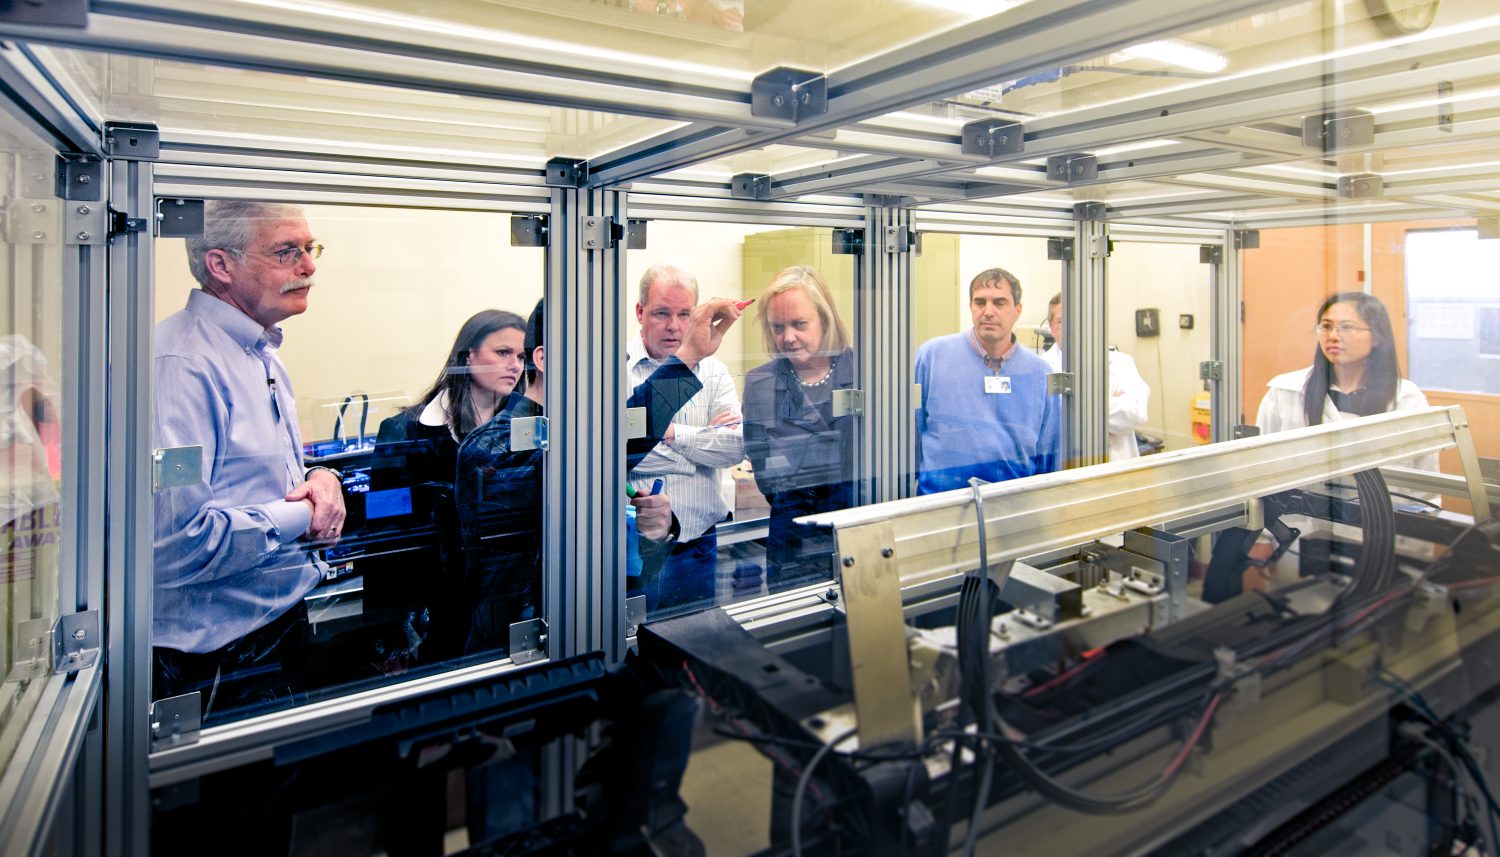 Meg Whitman watches as the printing team of HP Labs demonstrates its 3D printing testbed for her.